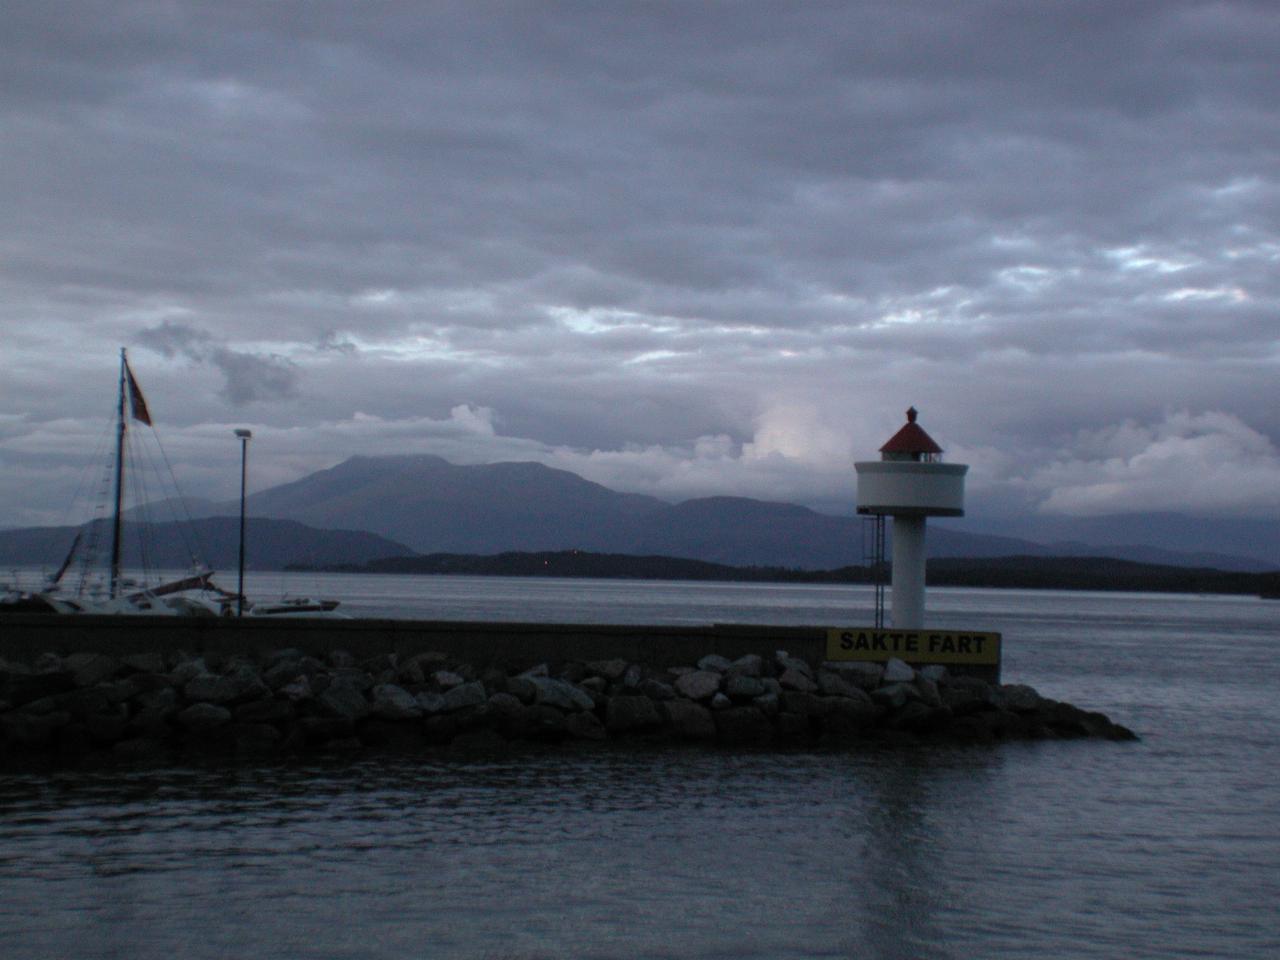 KPLU Viking Jazz: Lighthouse at entrance to yacht basin at Molde; notice wording of sign (means 